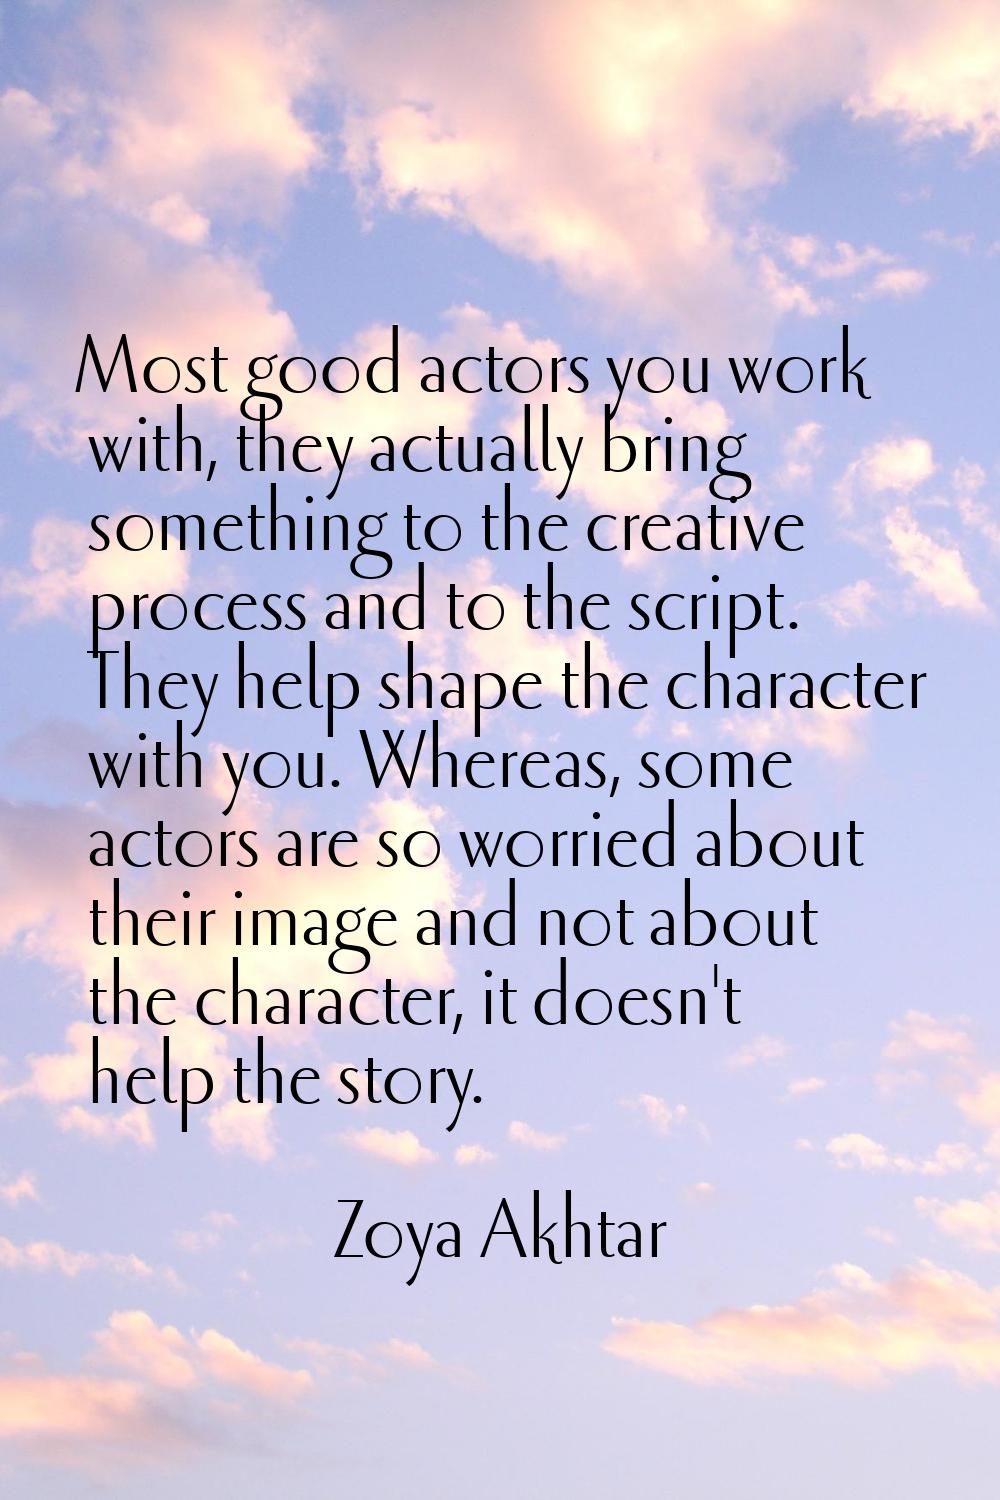 Most good actors you work with, they actually bring something to the creative process and to the sc